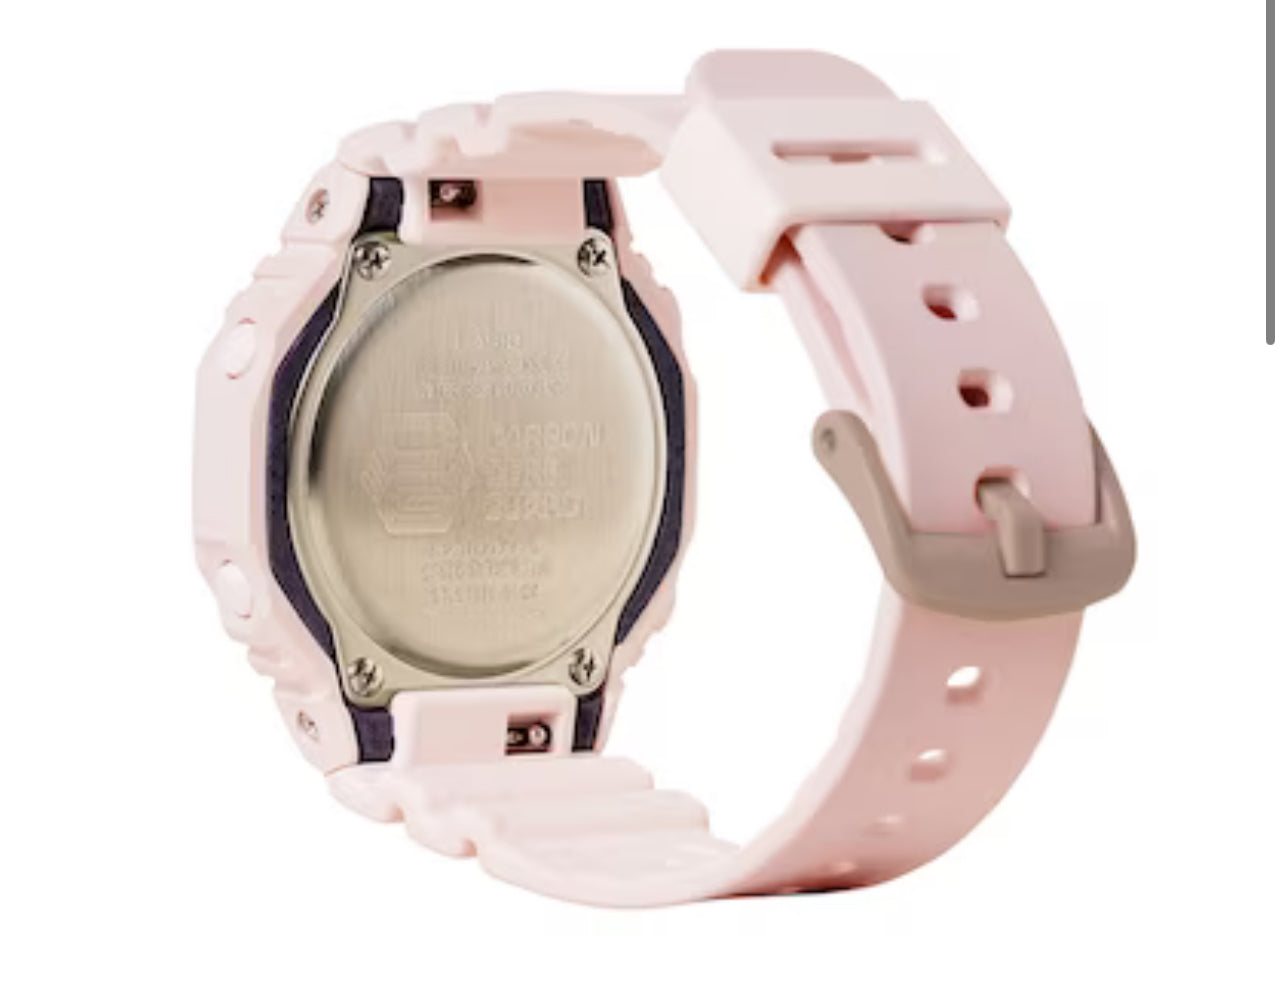 Ladies' Casio G-Shock S Series Pink Resin Strap Watch with Pink Dial